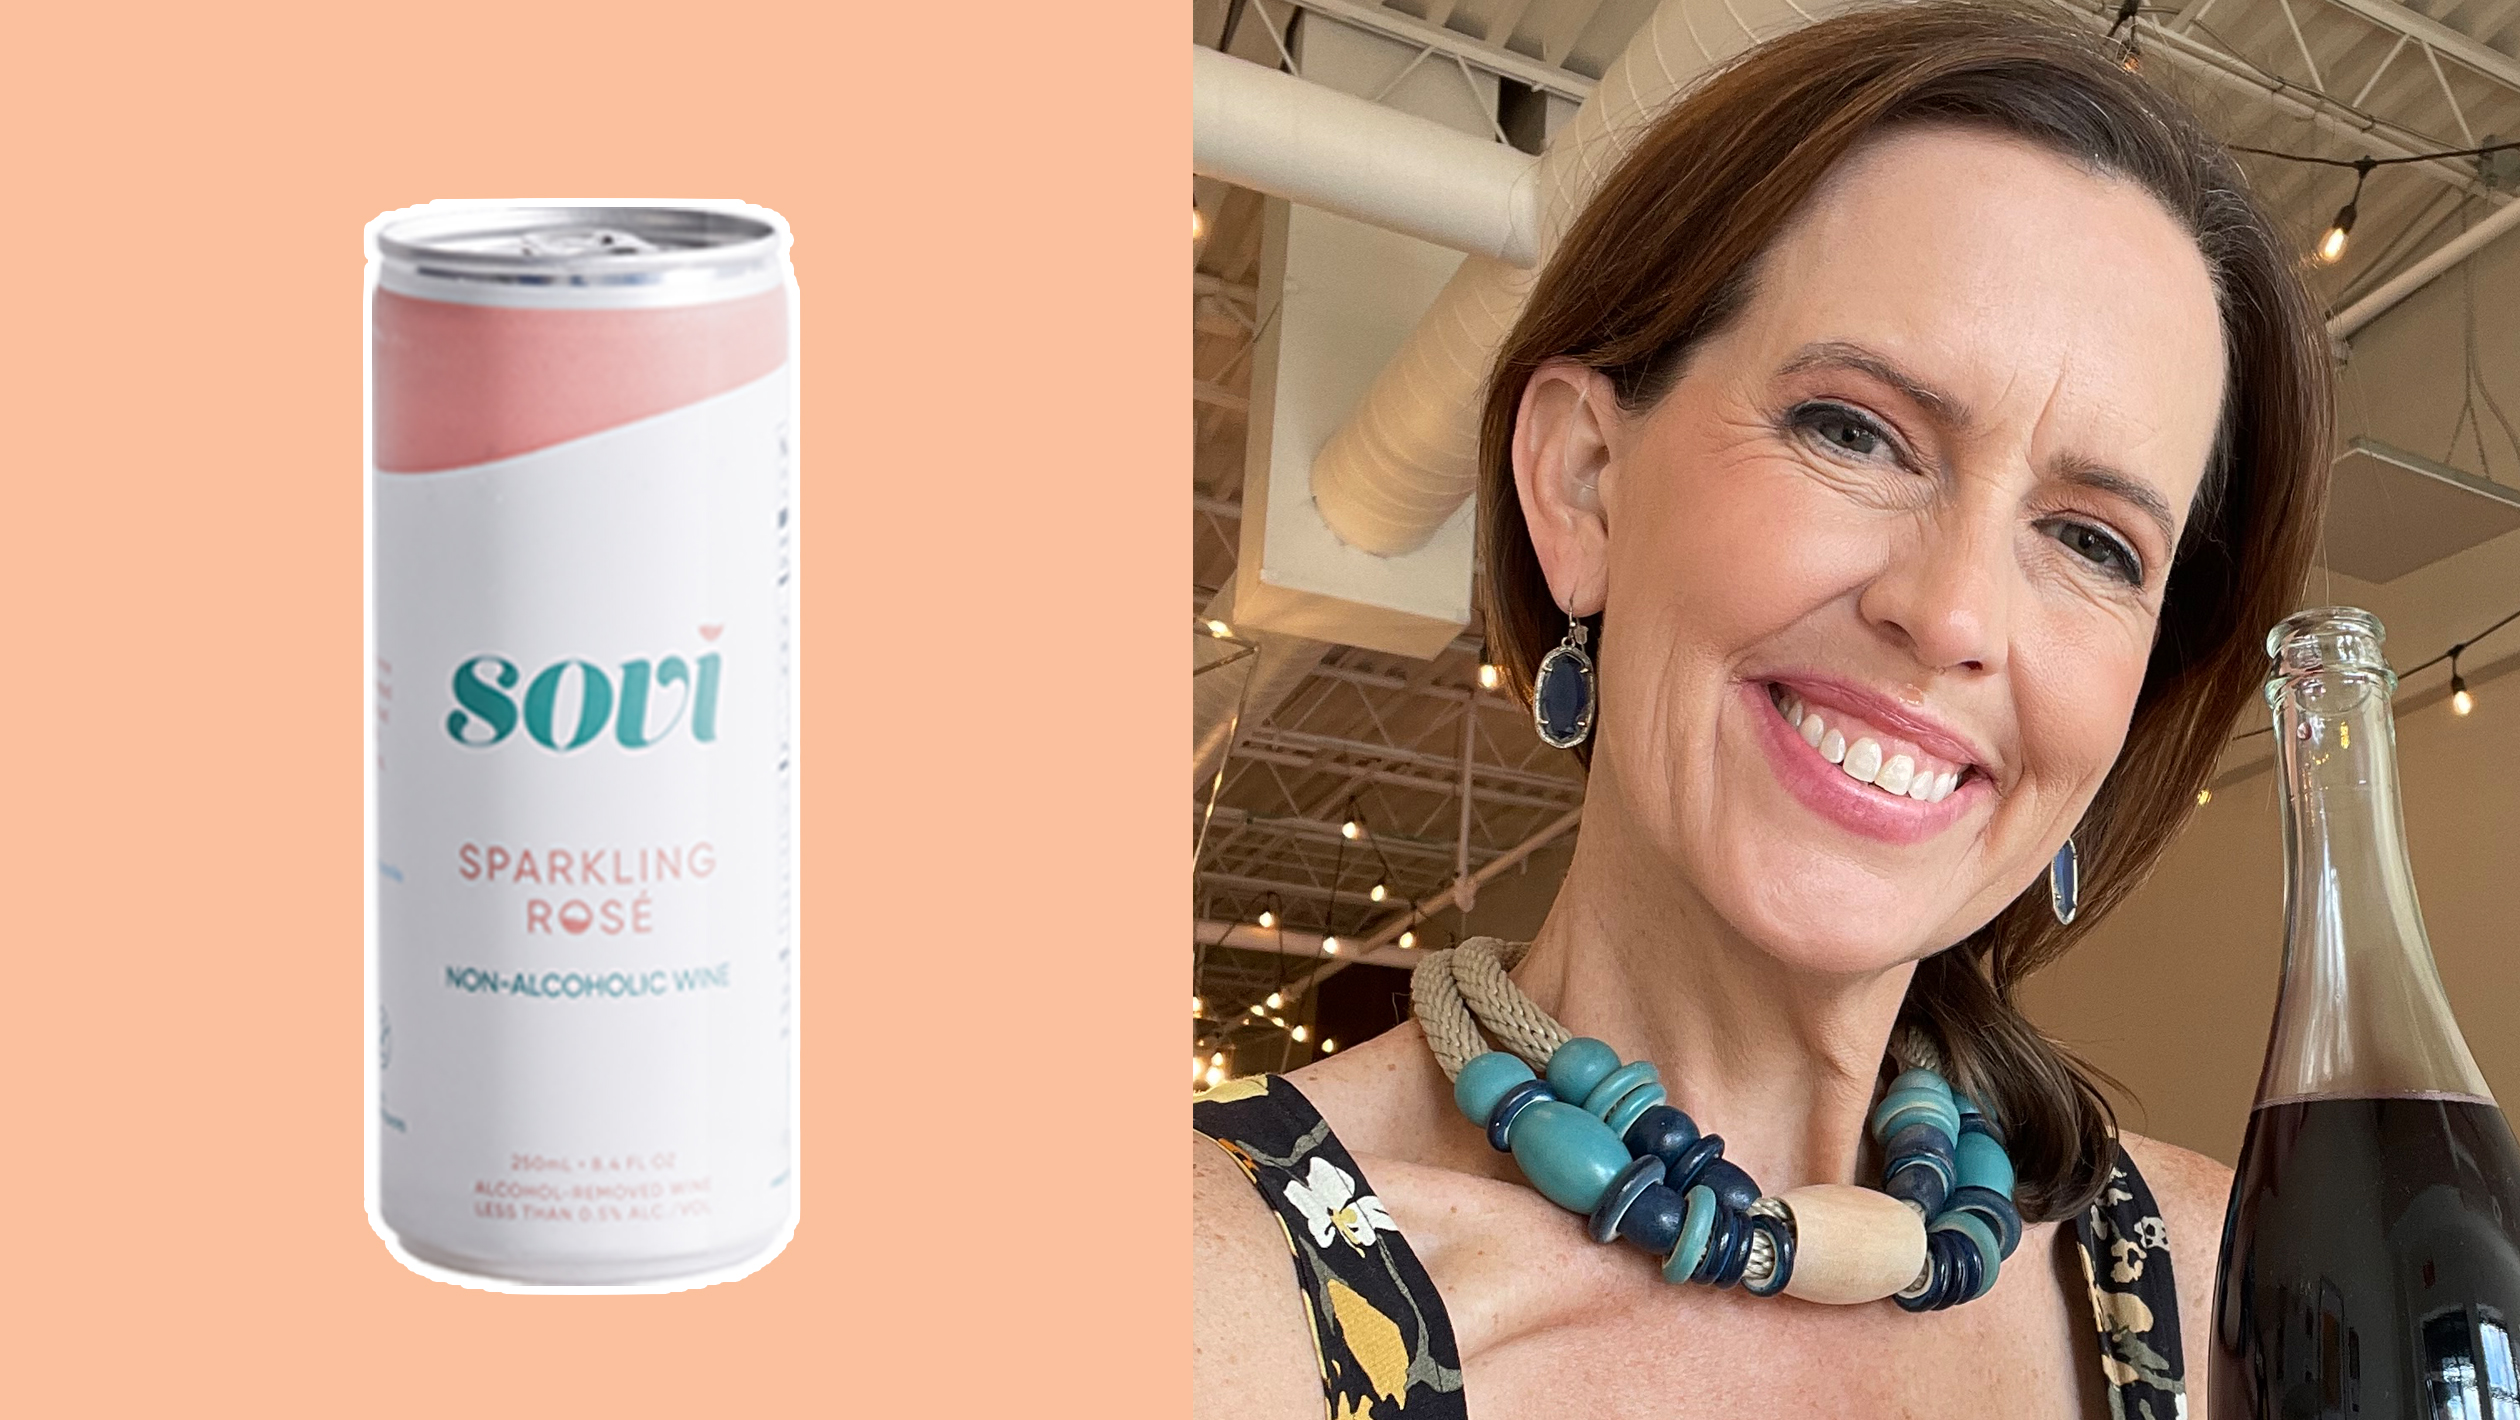 Sovi Sparkling Rosé, selected by Kristin Patrick, the co-owner of Loren’s Alcohol-Free Beverages. Photo (left) courtesy of Sovi; photo (right) courtesy of Kristin Patrick.